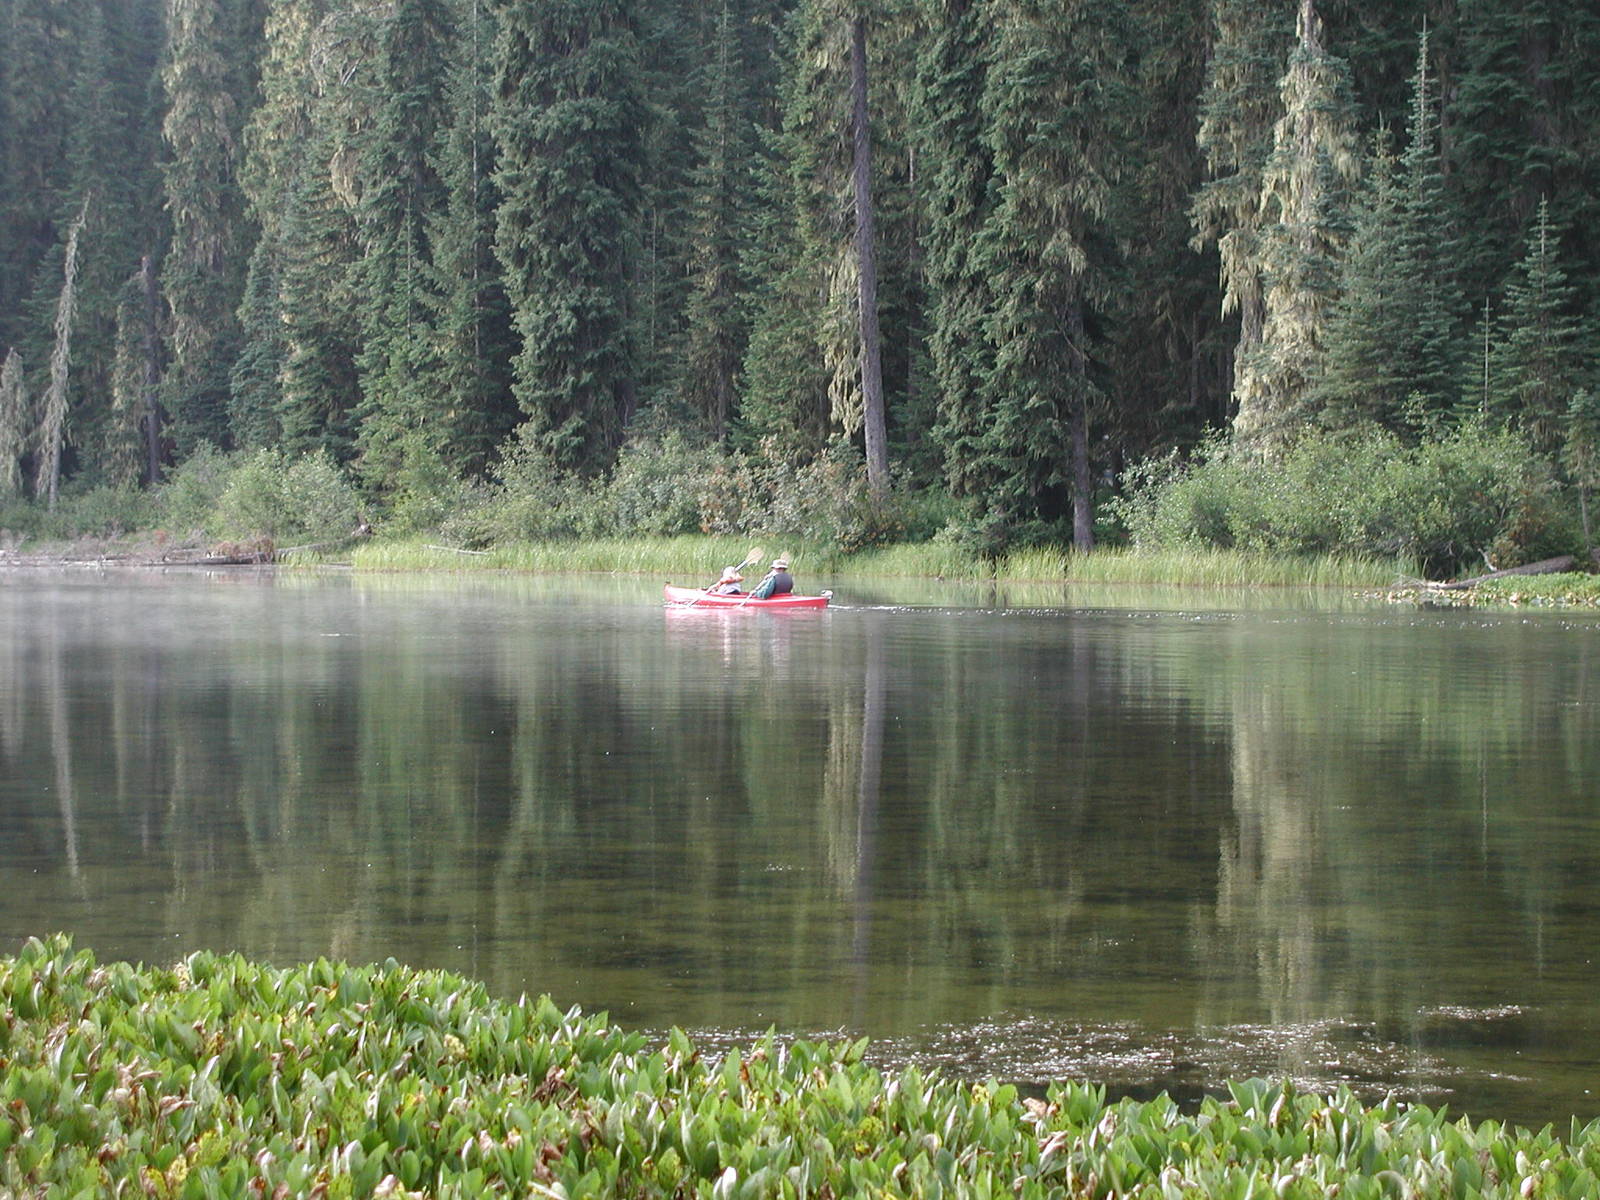 a person in a red canoe in the middle of a lake surrounded by trees